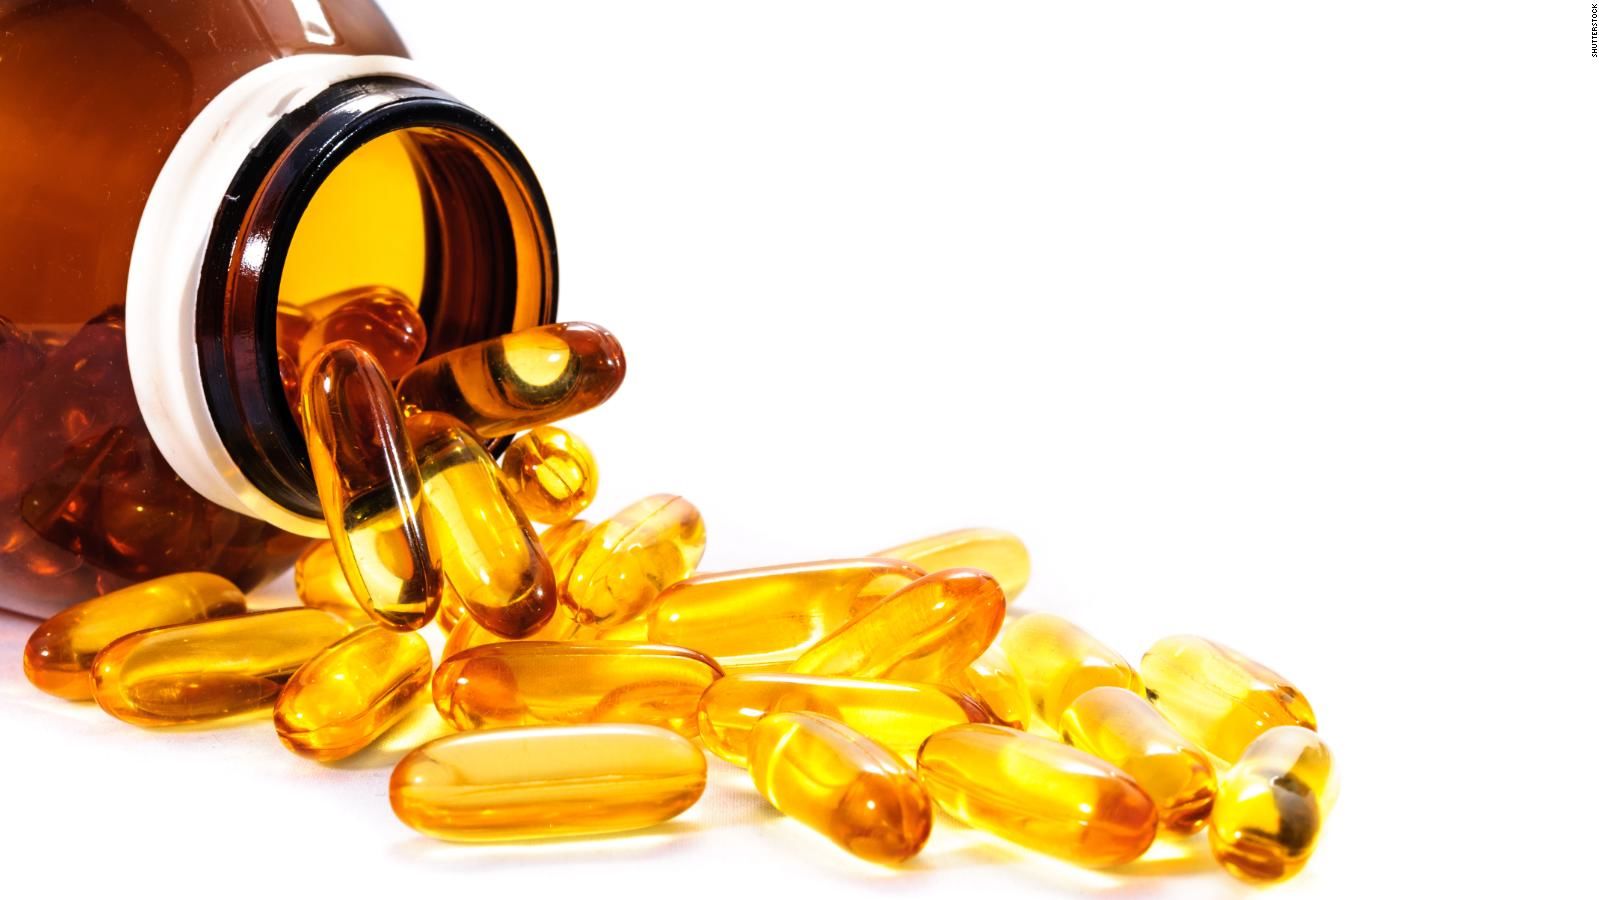 Vitamin D is required in small quantities for normal cell function, growth and development.